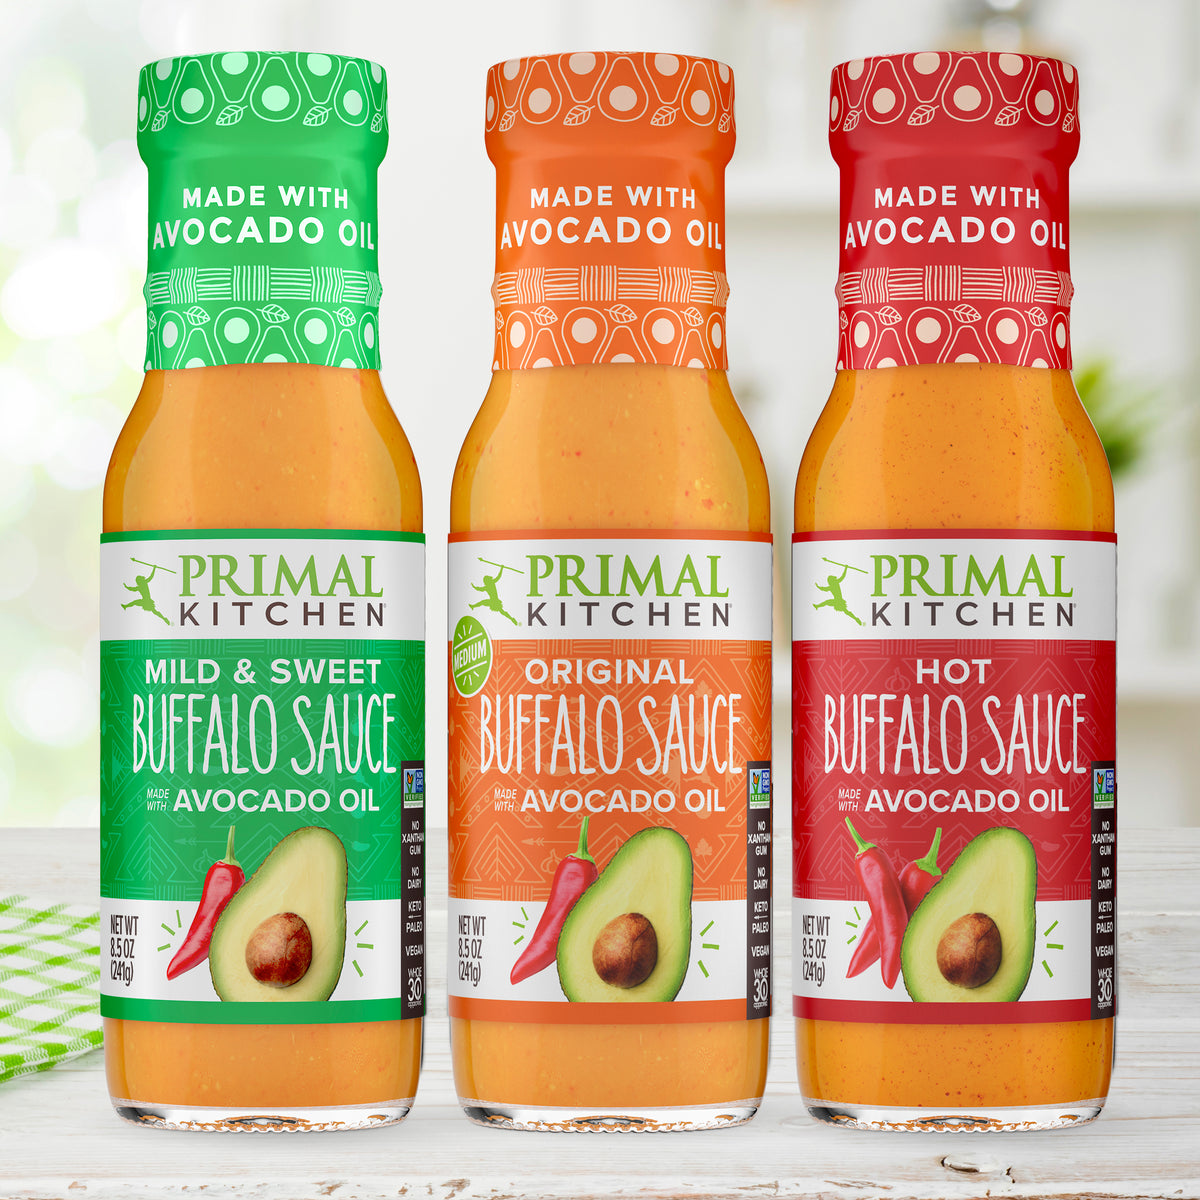 Primal Kitchen Buffalo Sauce Box Sweepstakes Official Terms & Conditions